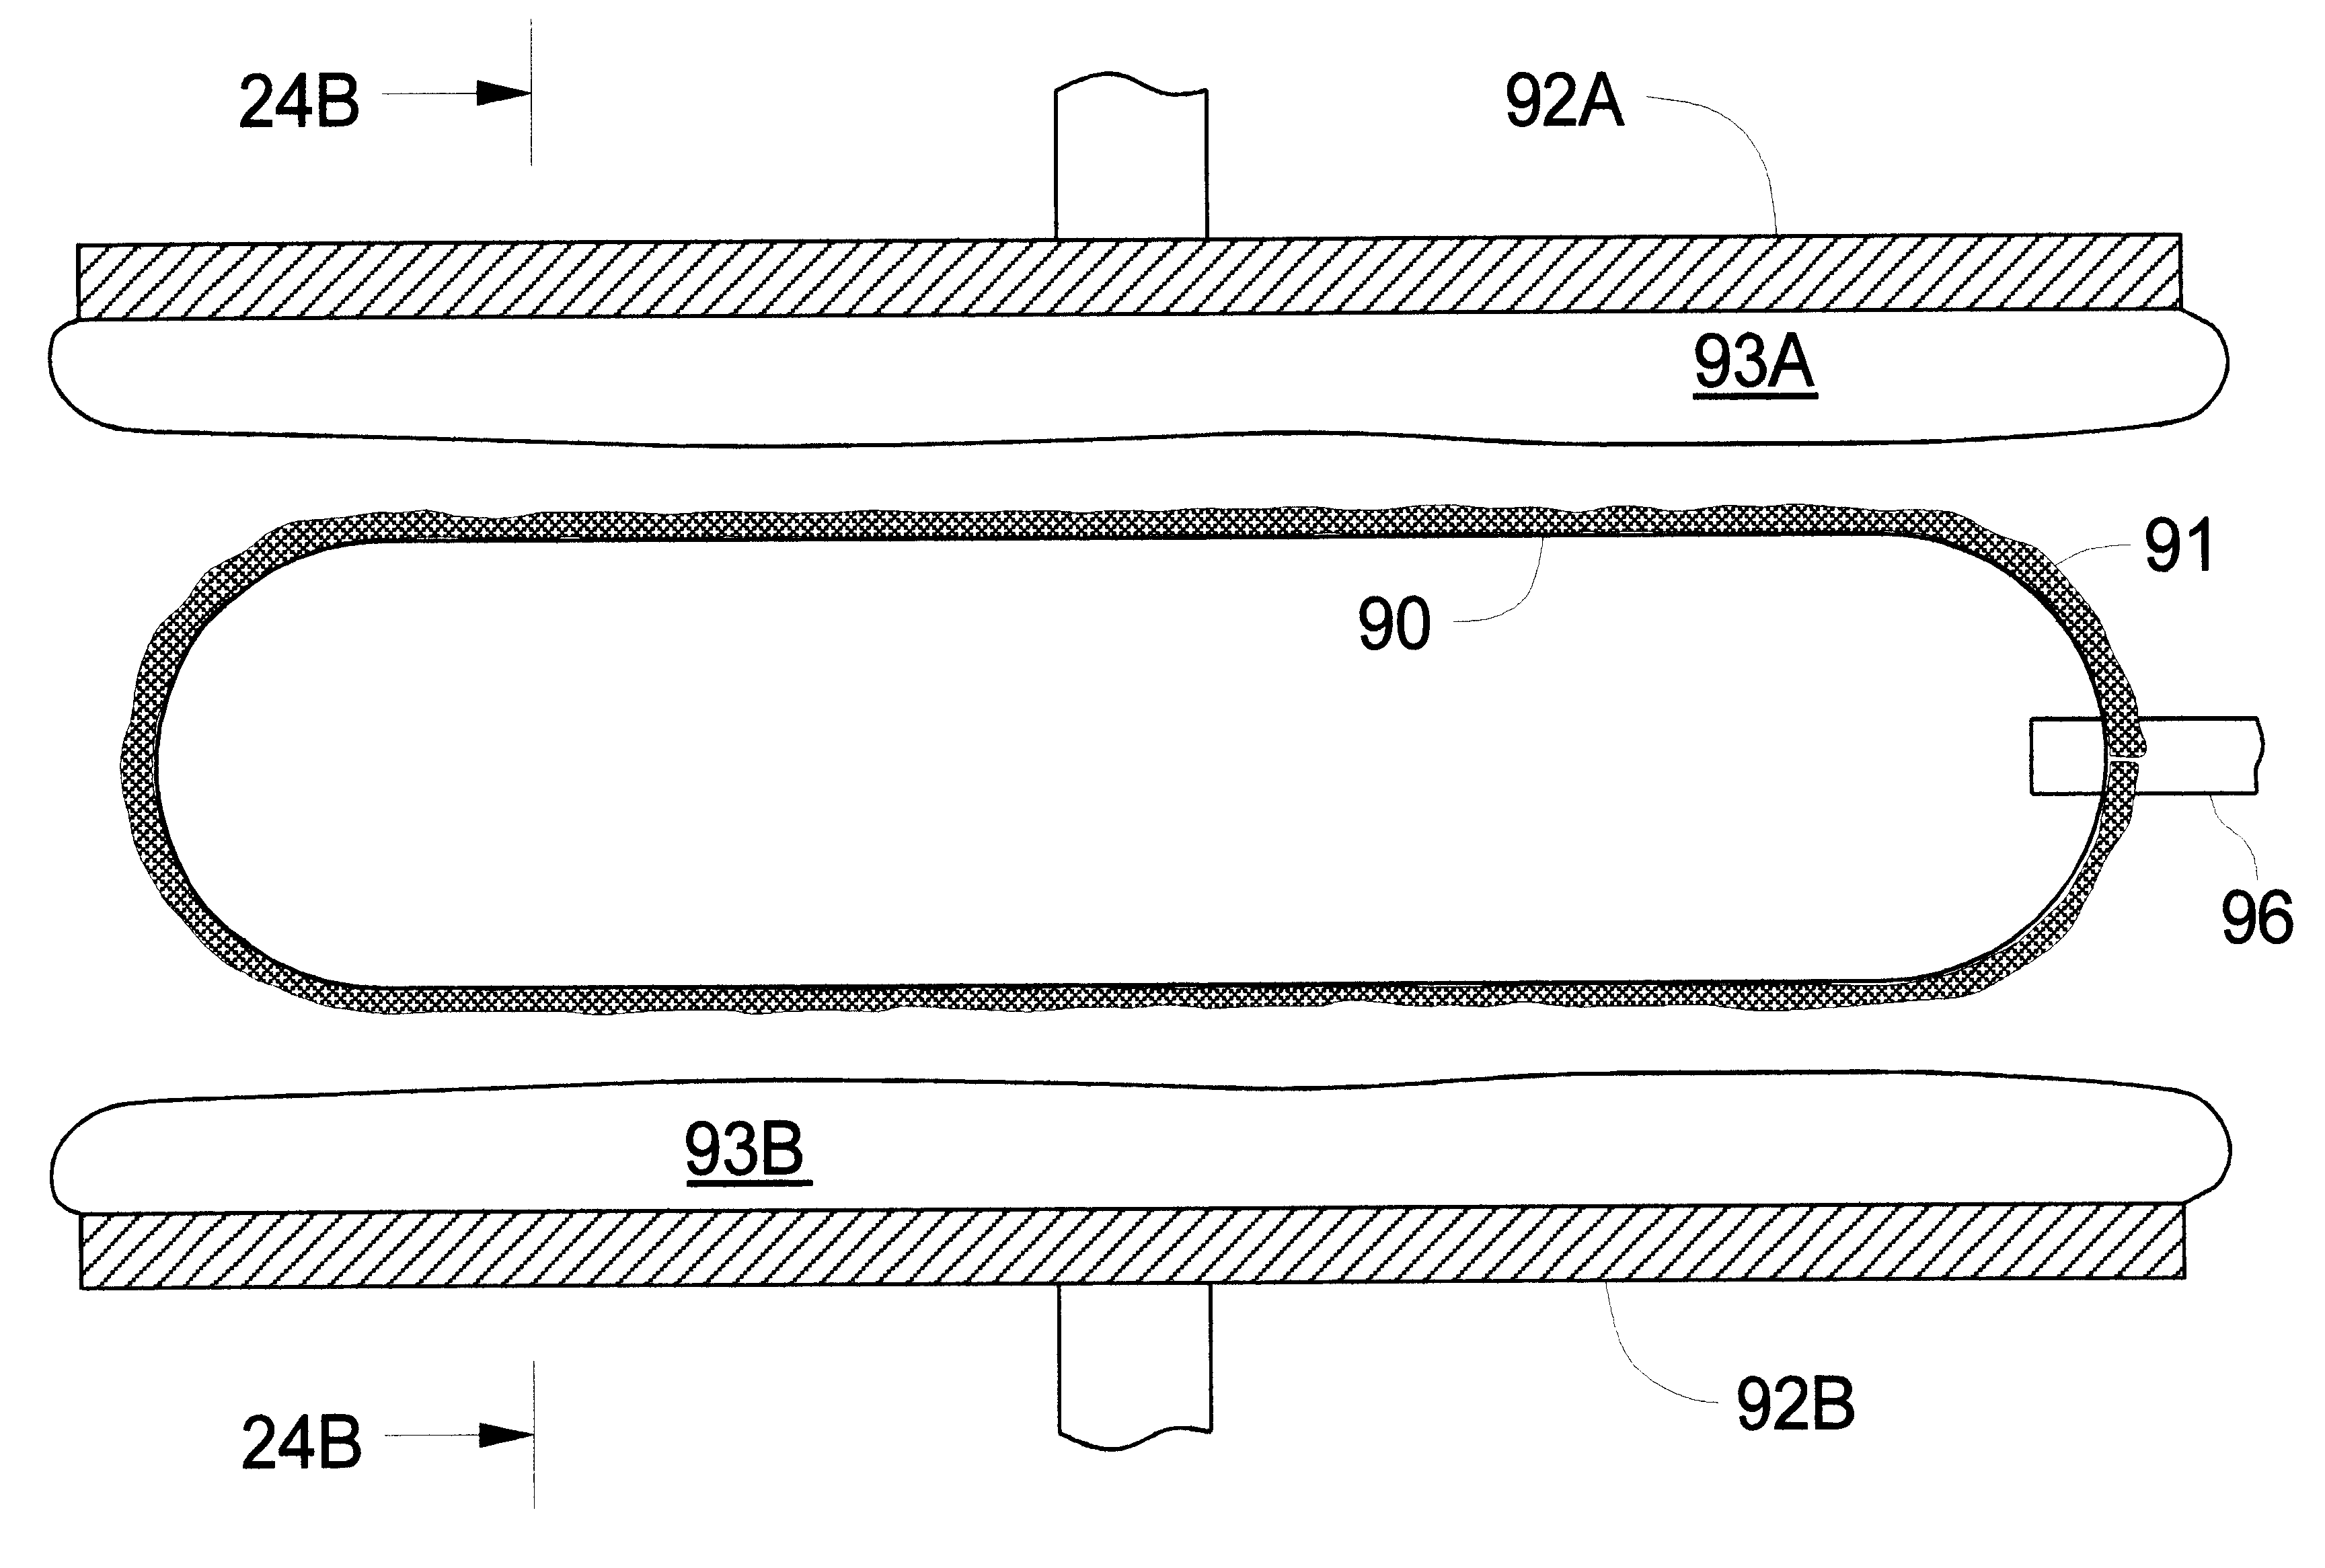 Method for fabricating composite pressure vessels and products fabricated by the method